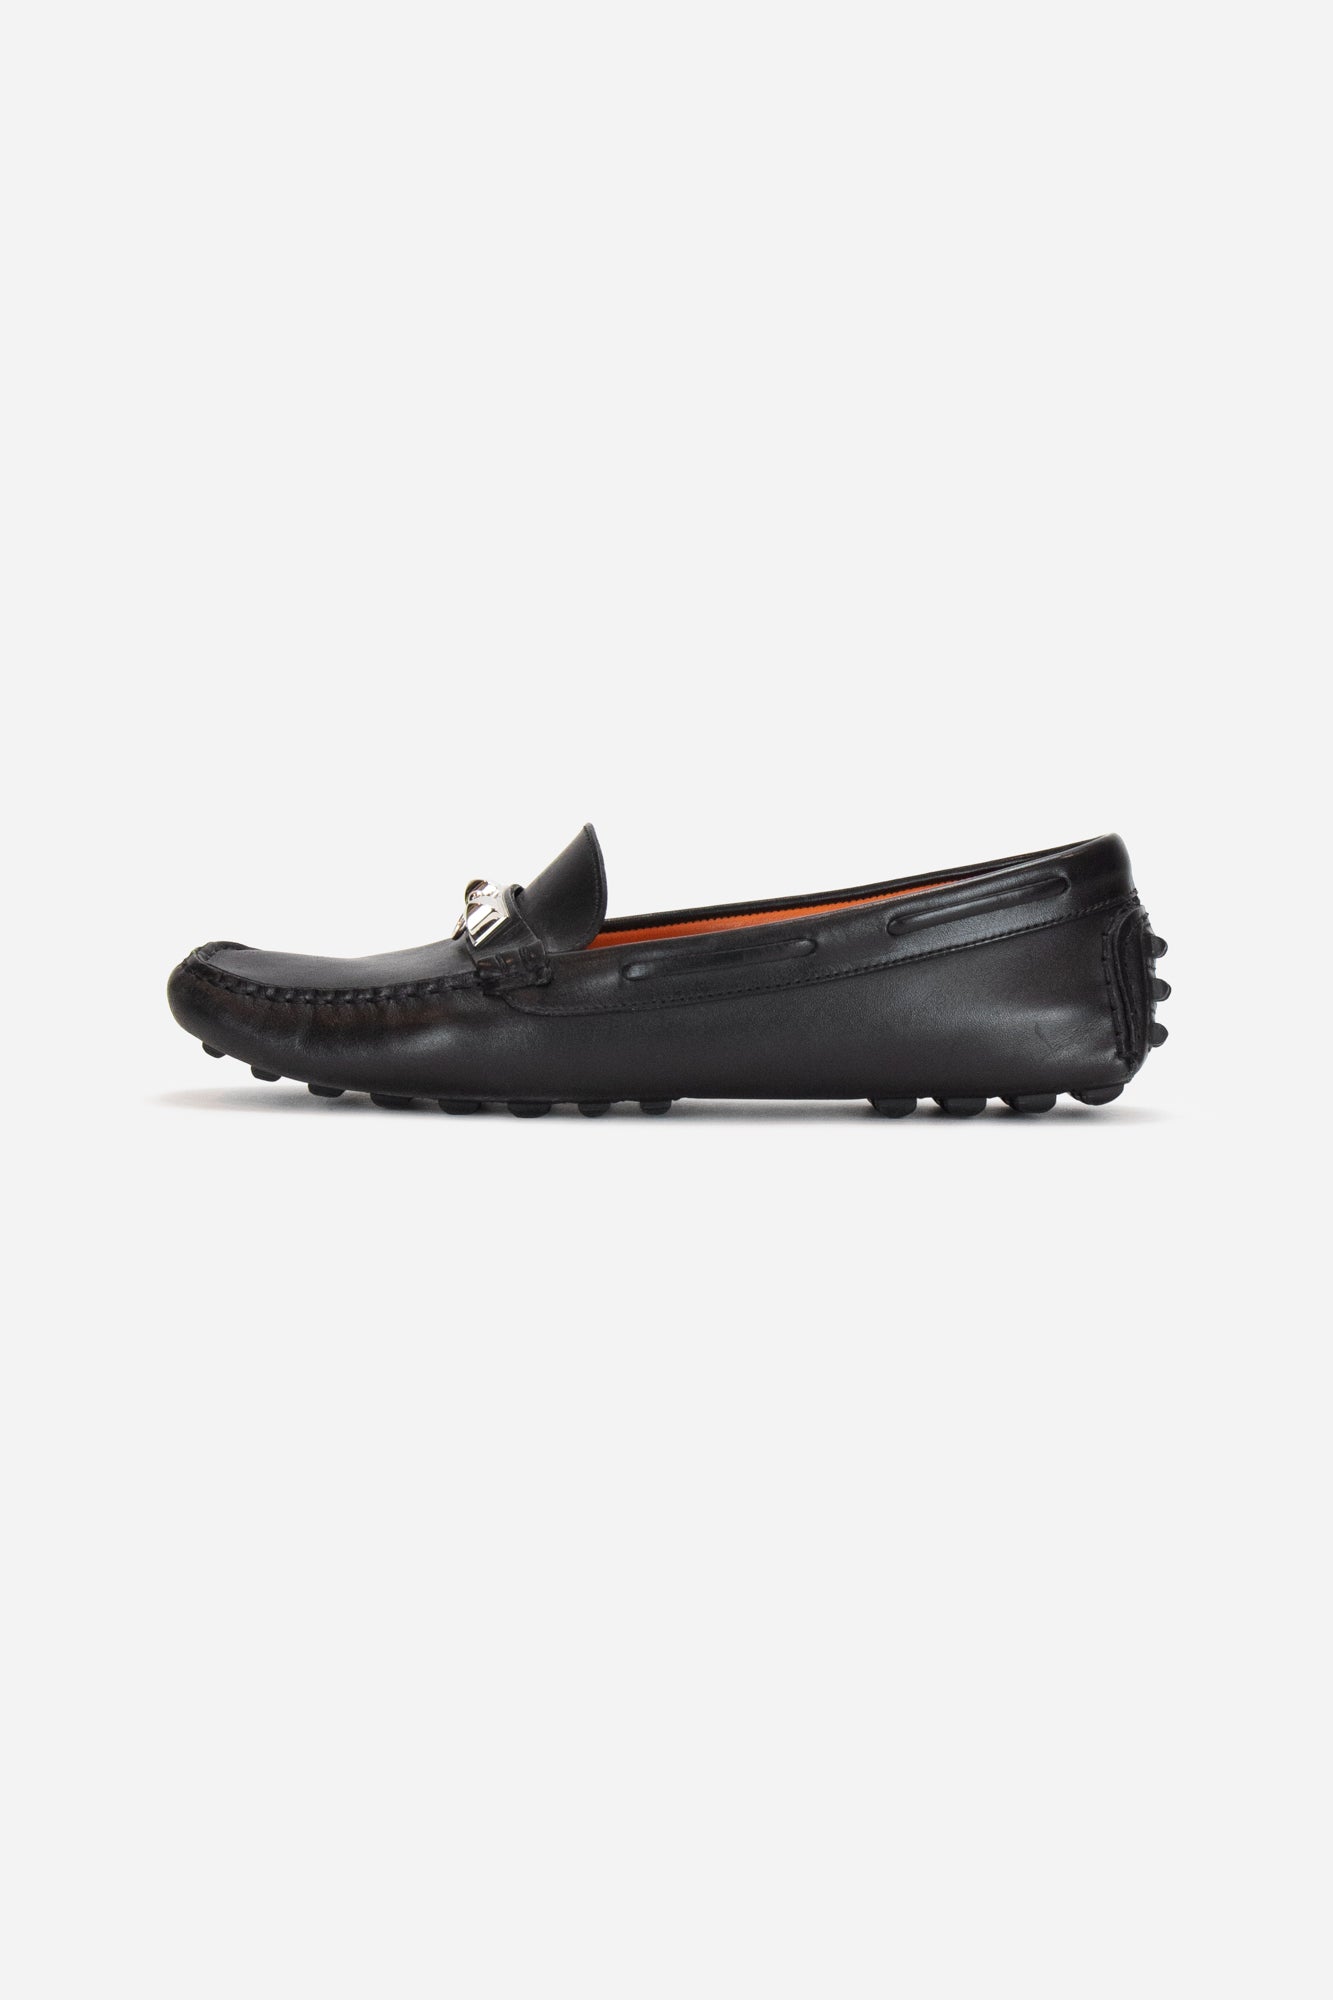 Black Leather Rivale Loafers - So Over It Luxury Consignment